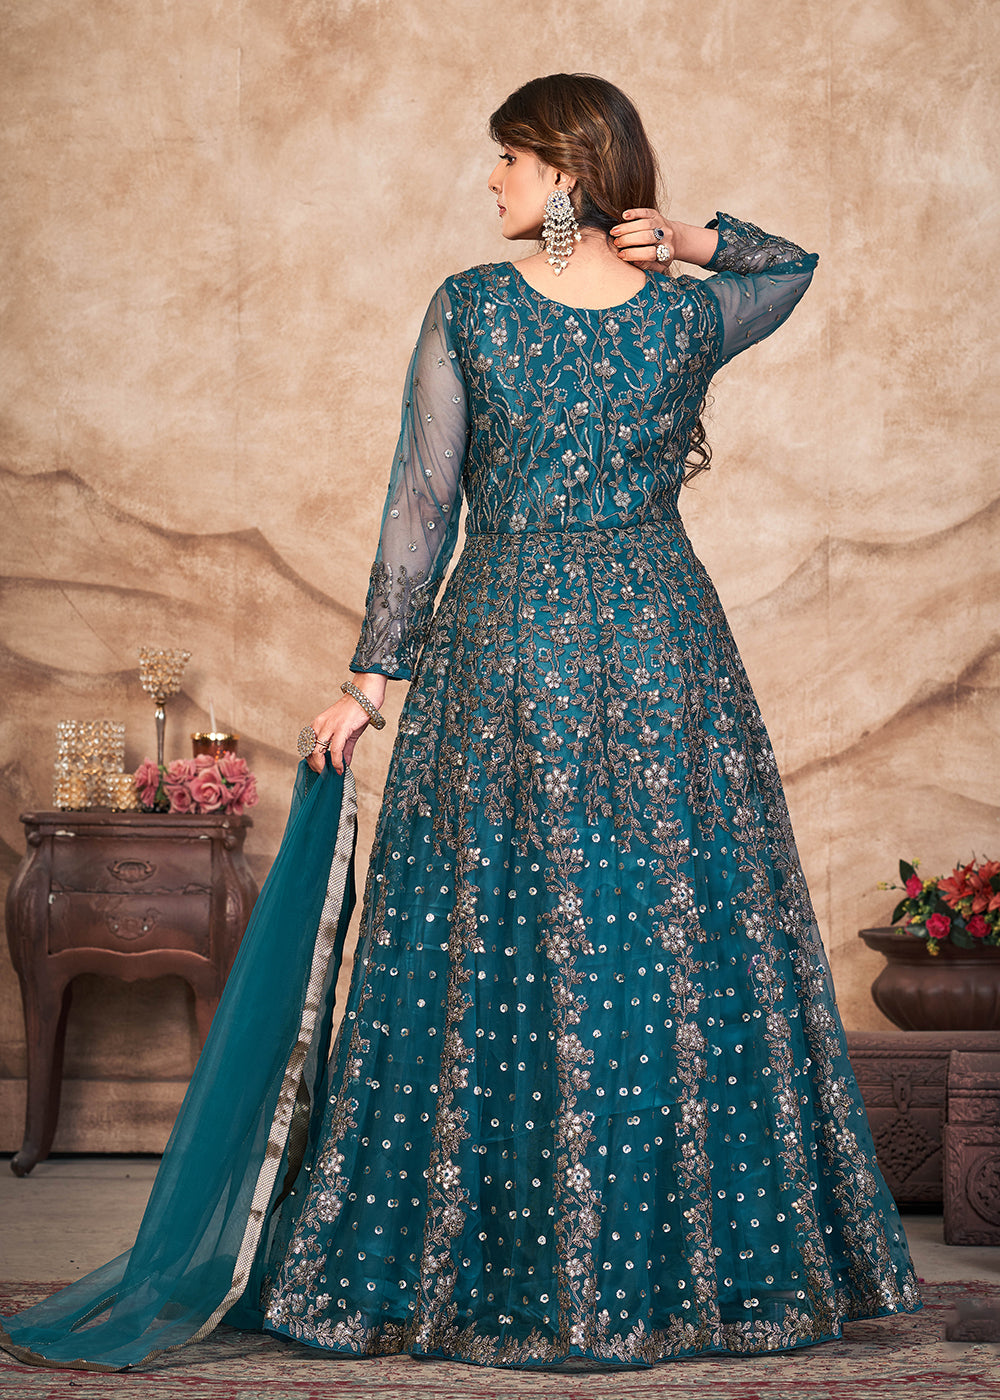 Buy Now Peacock Blue Net Embroidered Pant Style Anarkali Suit Online in USA, UK, Australia, New Zealand, Canada & Worldwide at Empress Clothing. 